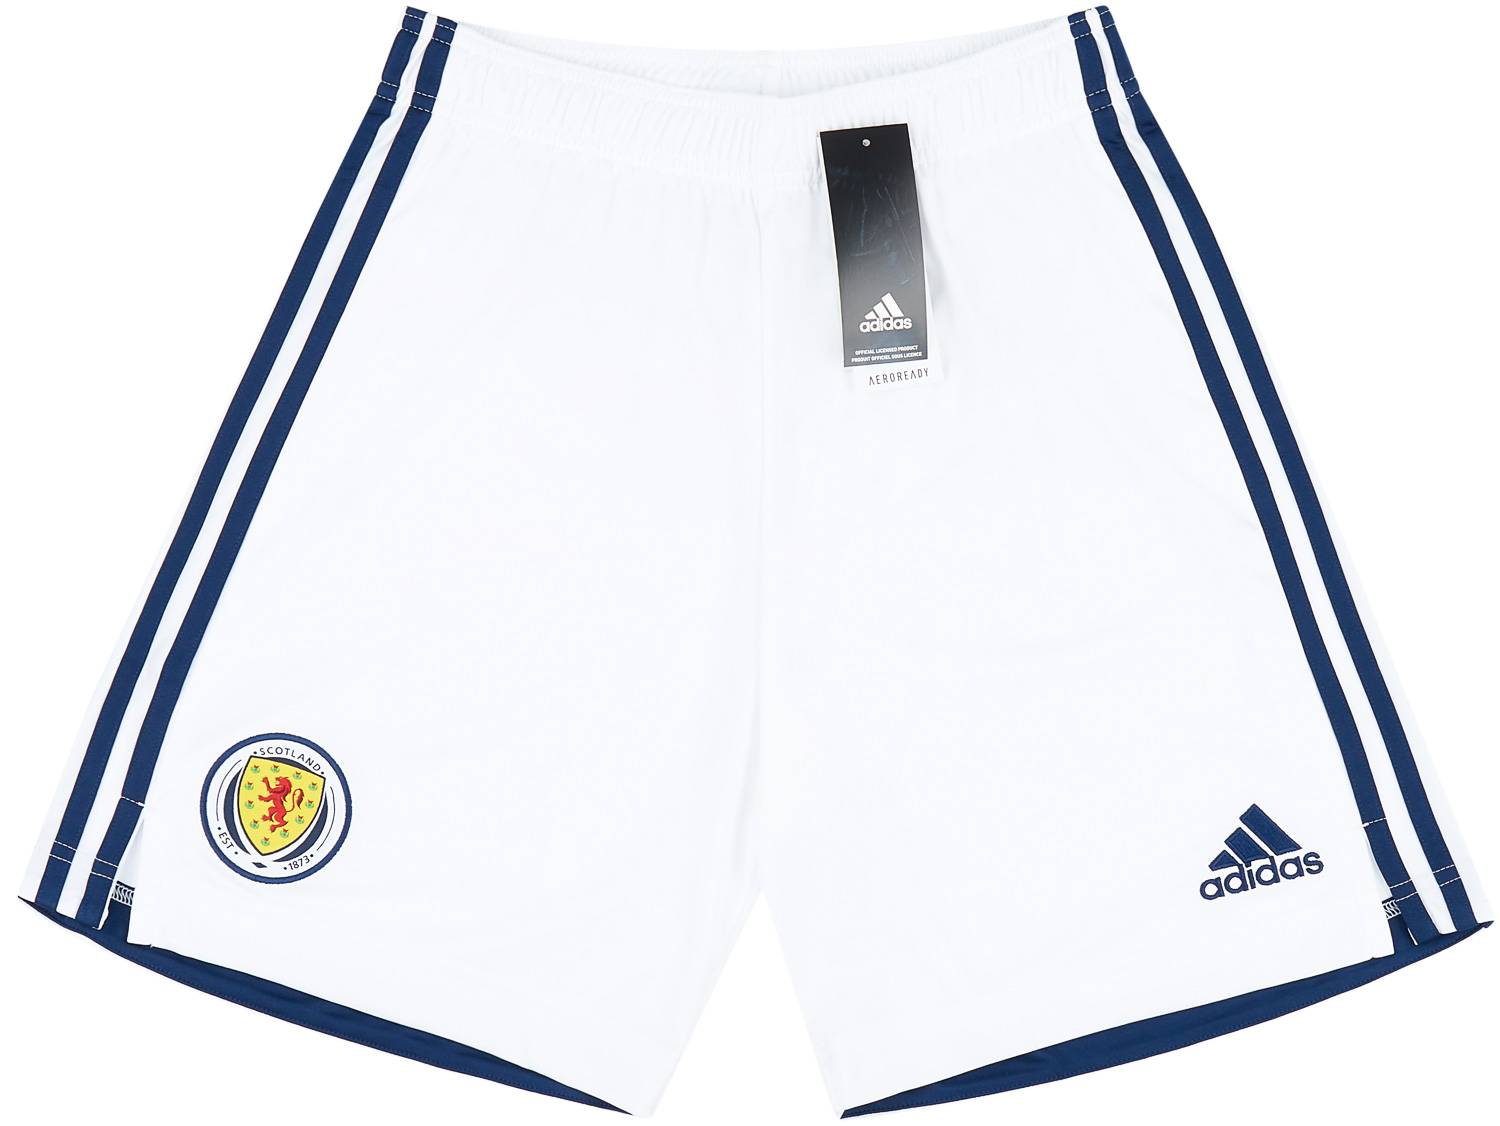 2020-21 Scotland Player Issue Away Shorts - 9/10 - (M)